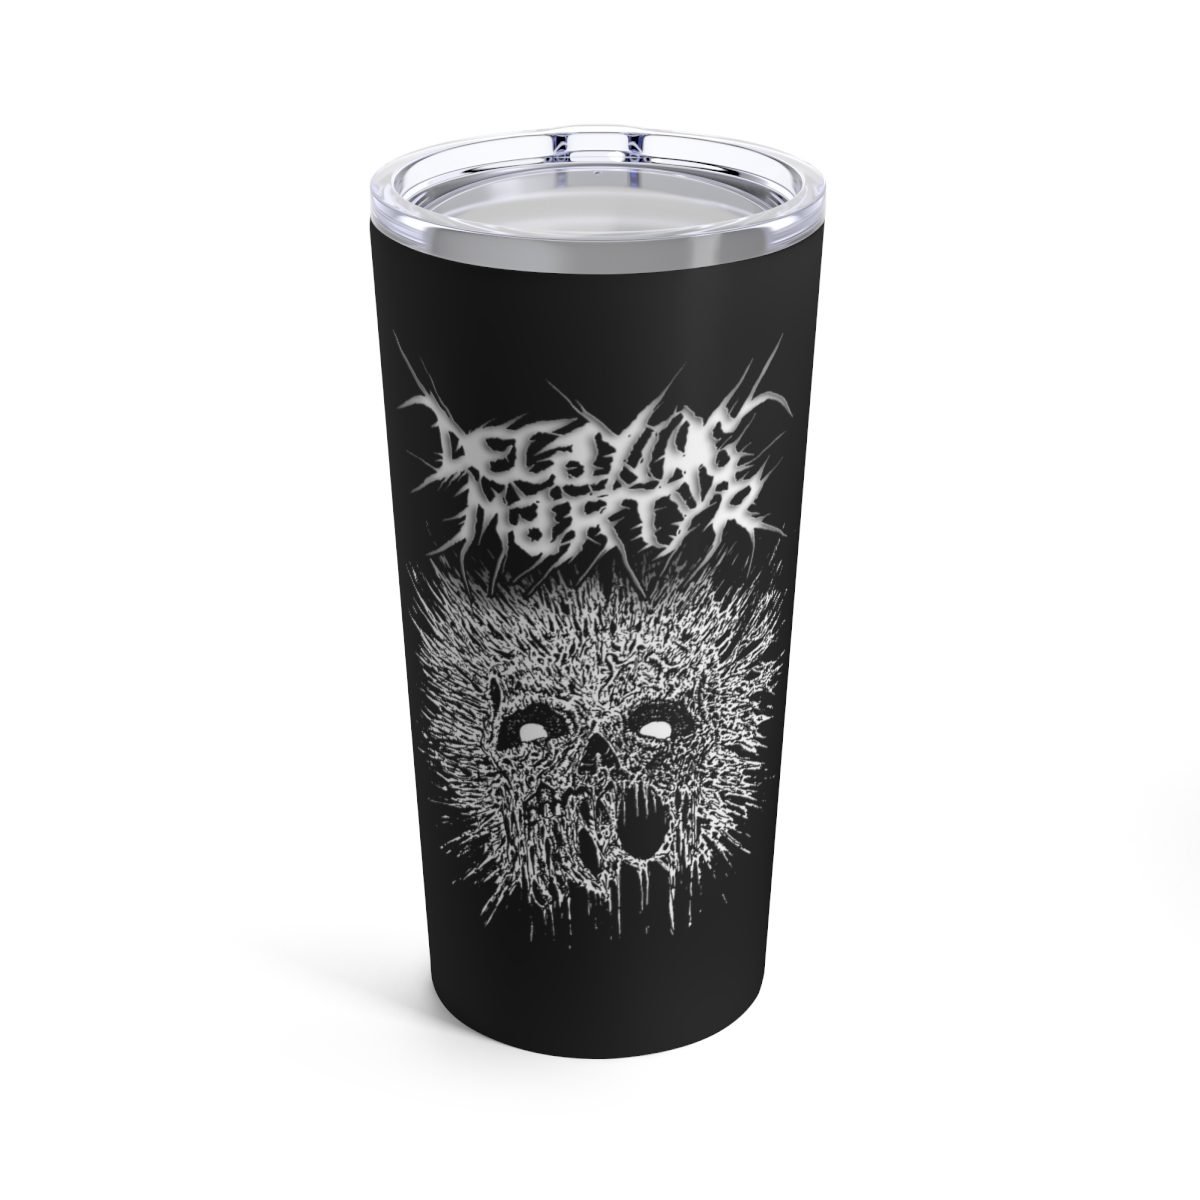 Decaying Martyr – Martyr’s Cry 20oz Stainless Steel Tumbler